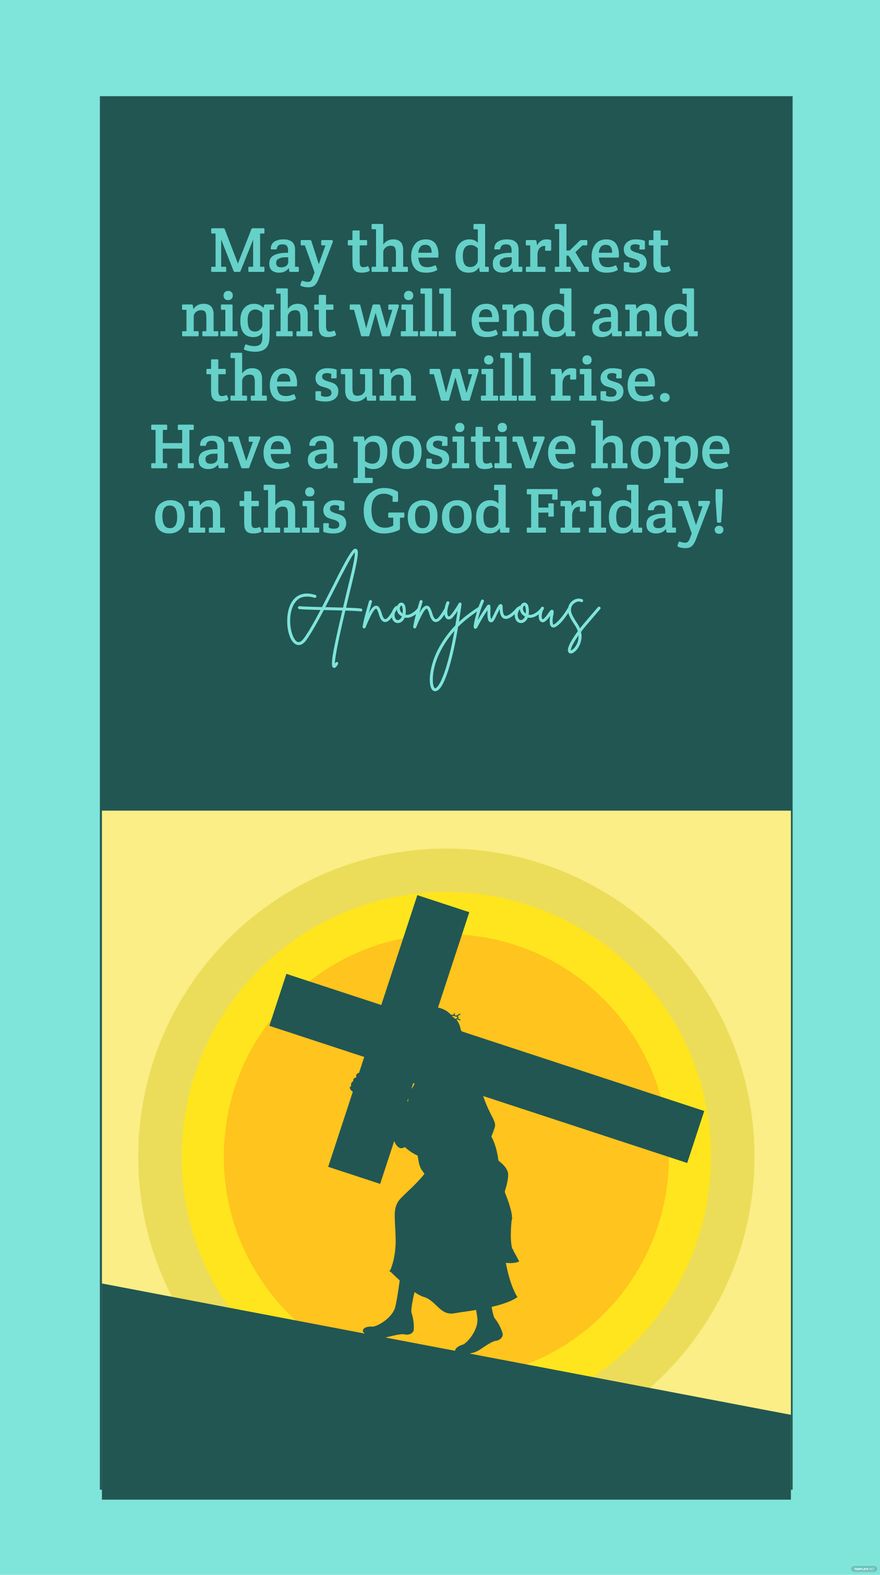 Free Anonymous - May the darkest night will end and the sun will rise. Have a positive hope on this Good Friday! in JPG